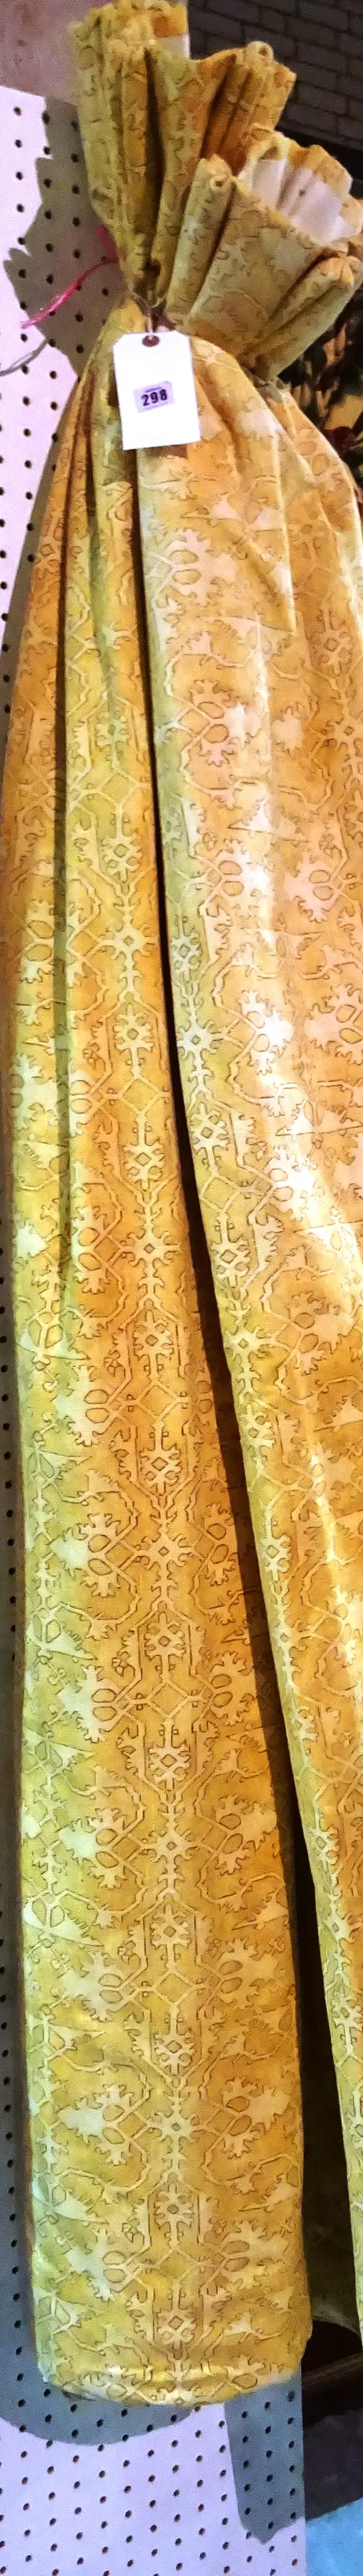 Curtains; A pair of lined and interlined yellow patterned curtains, 75cm wide x 190cm drop. (2) HANG